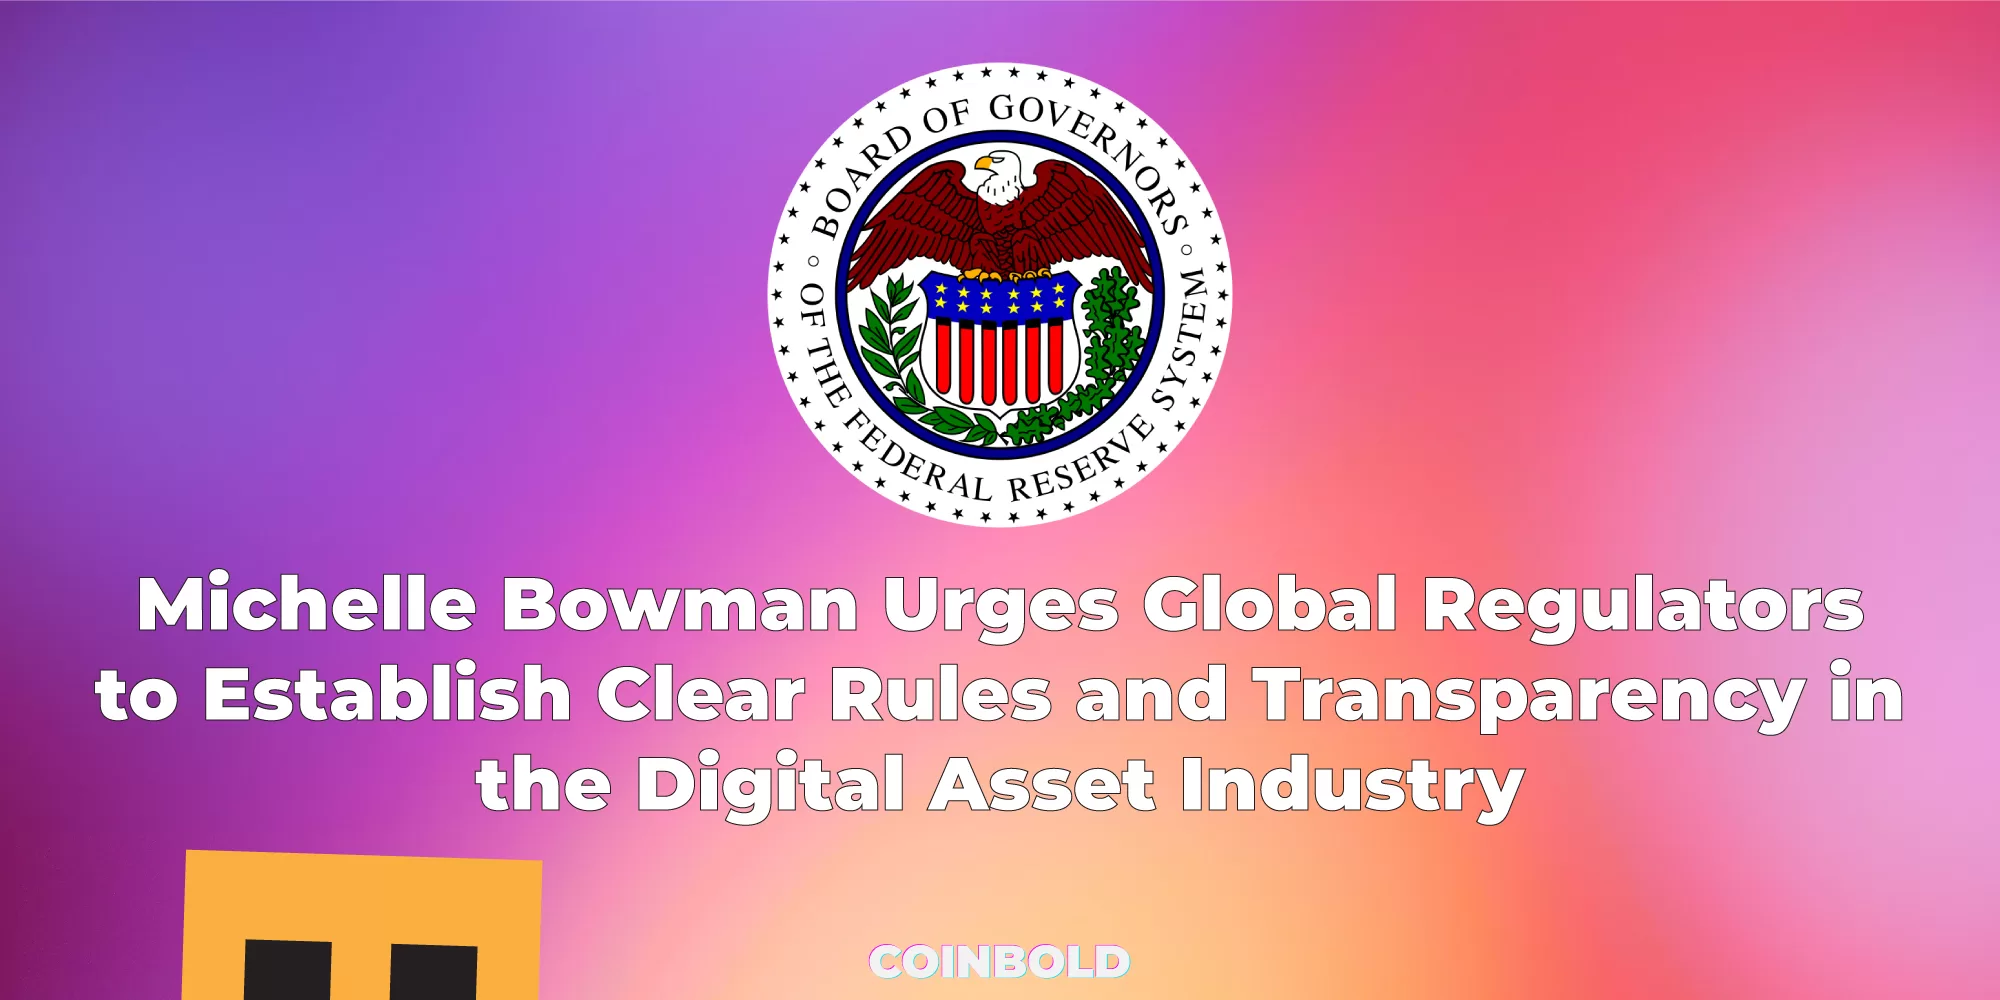 Michelle Bowman Urges Global Regulators to Establish Clear Rules and Transparency in the Digital Asset Industry